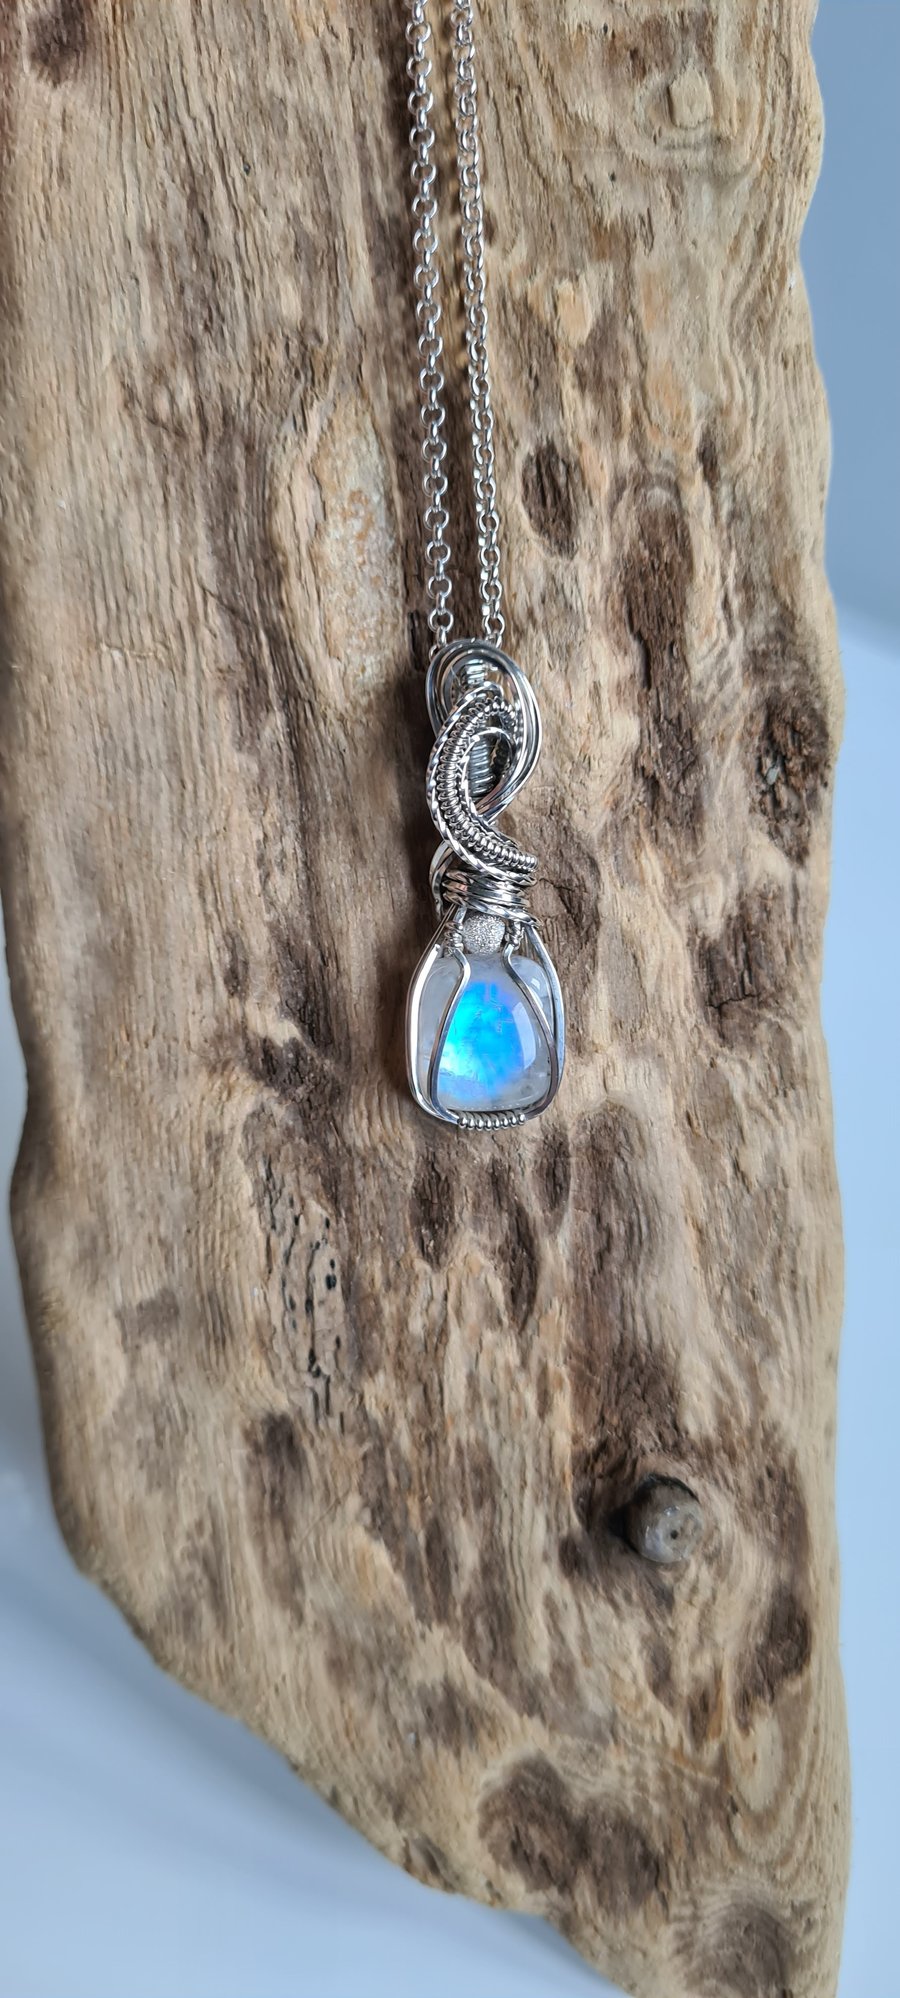 Handmade Natural Rainbow Moonstone & 925 Silver Necklace Pendant with Chain Gift